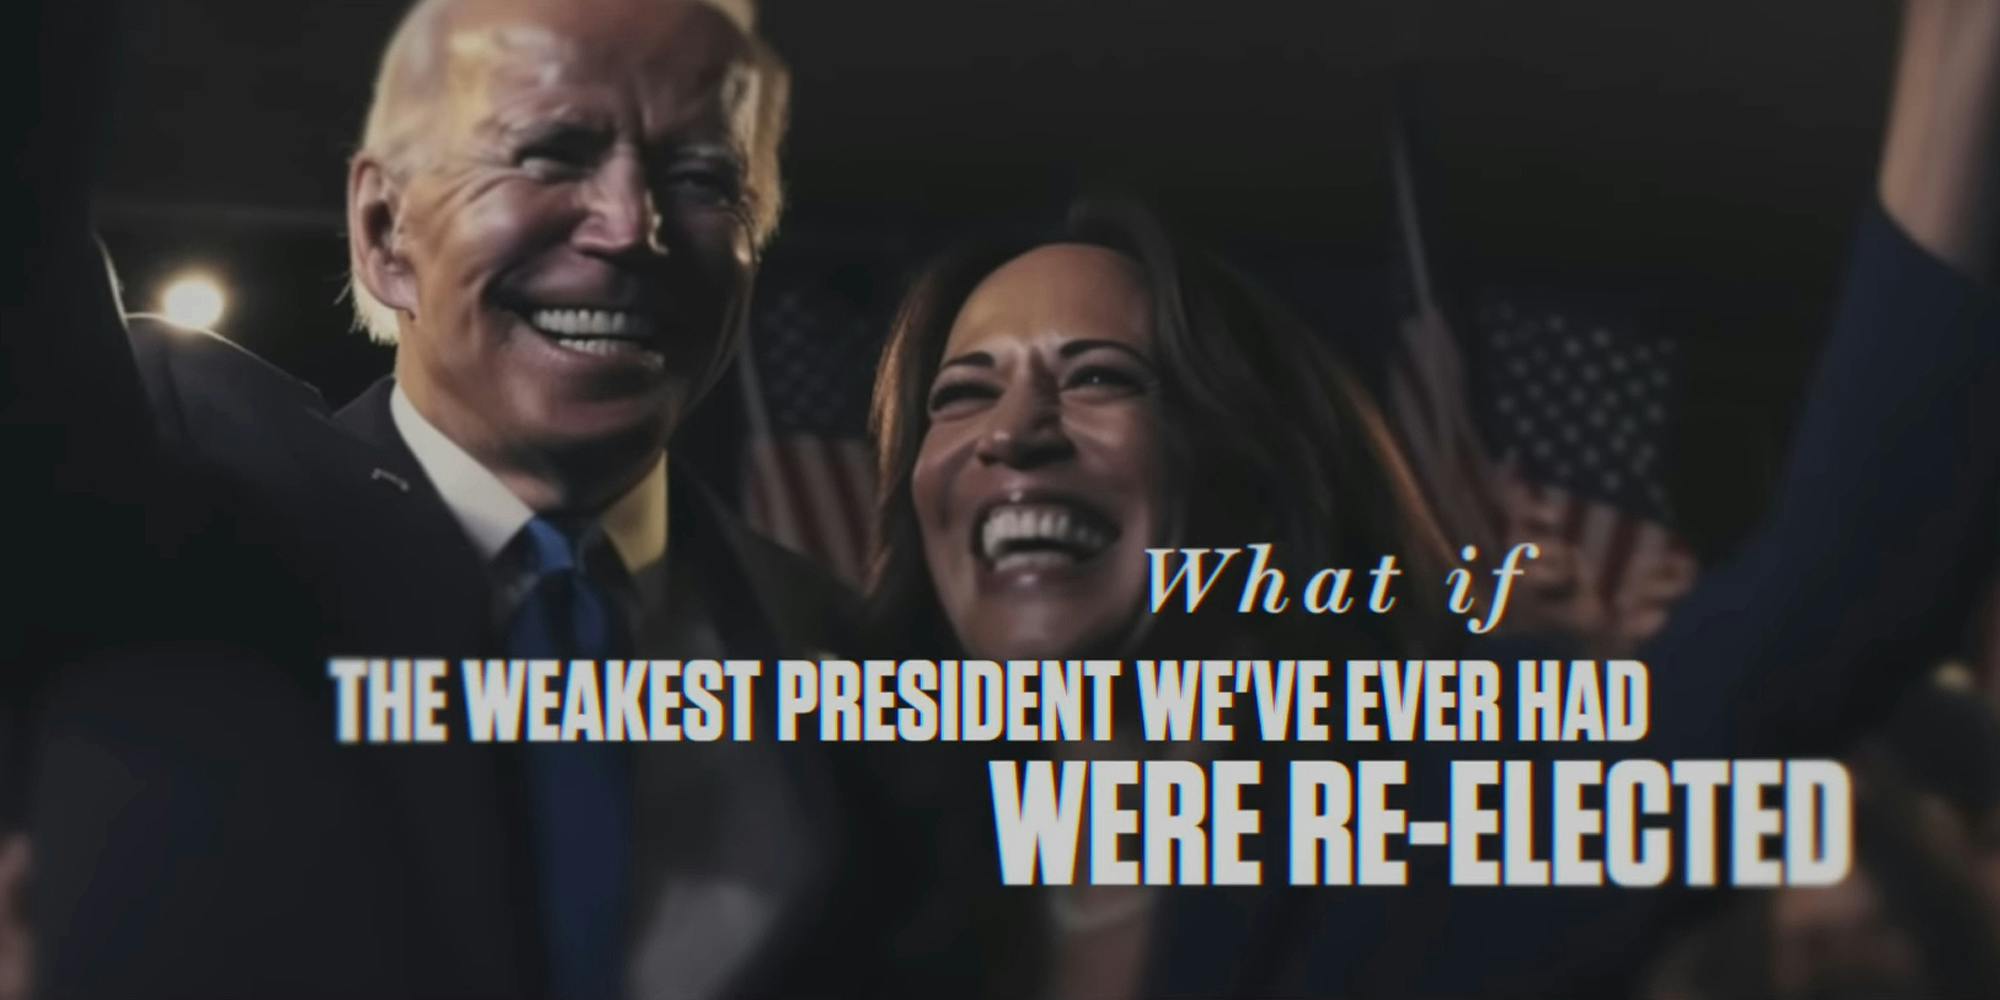 AI generated image of Joe Biden and Kamala Harris with caption "What if THE WEAKEST PRESIDENT WE'VE EVER HAD WERE RE-ELECTED"